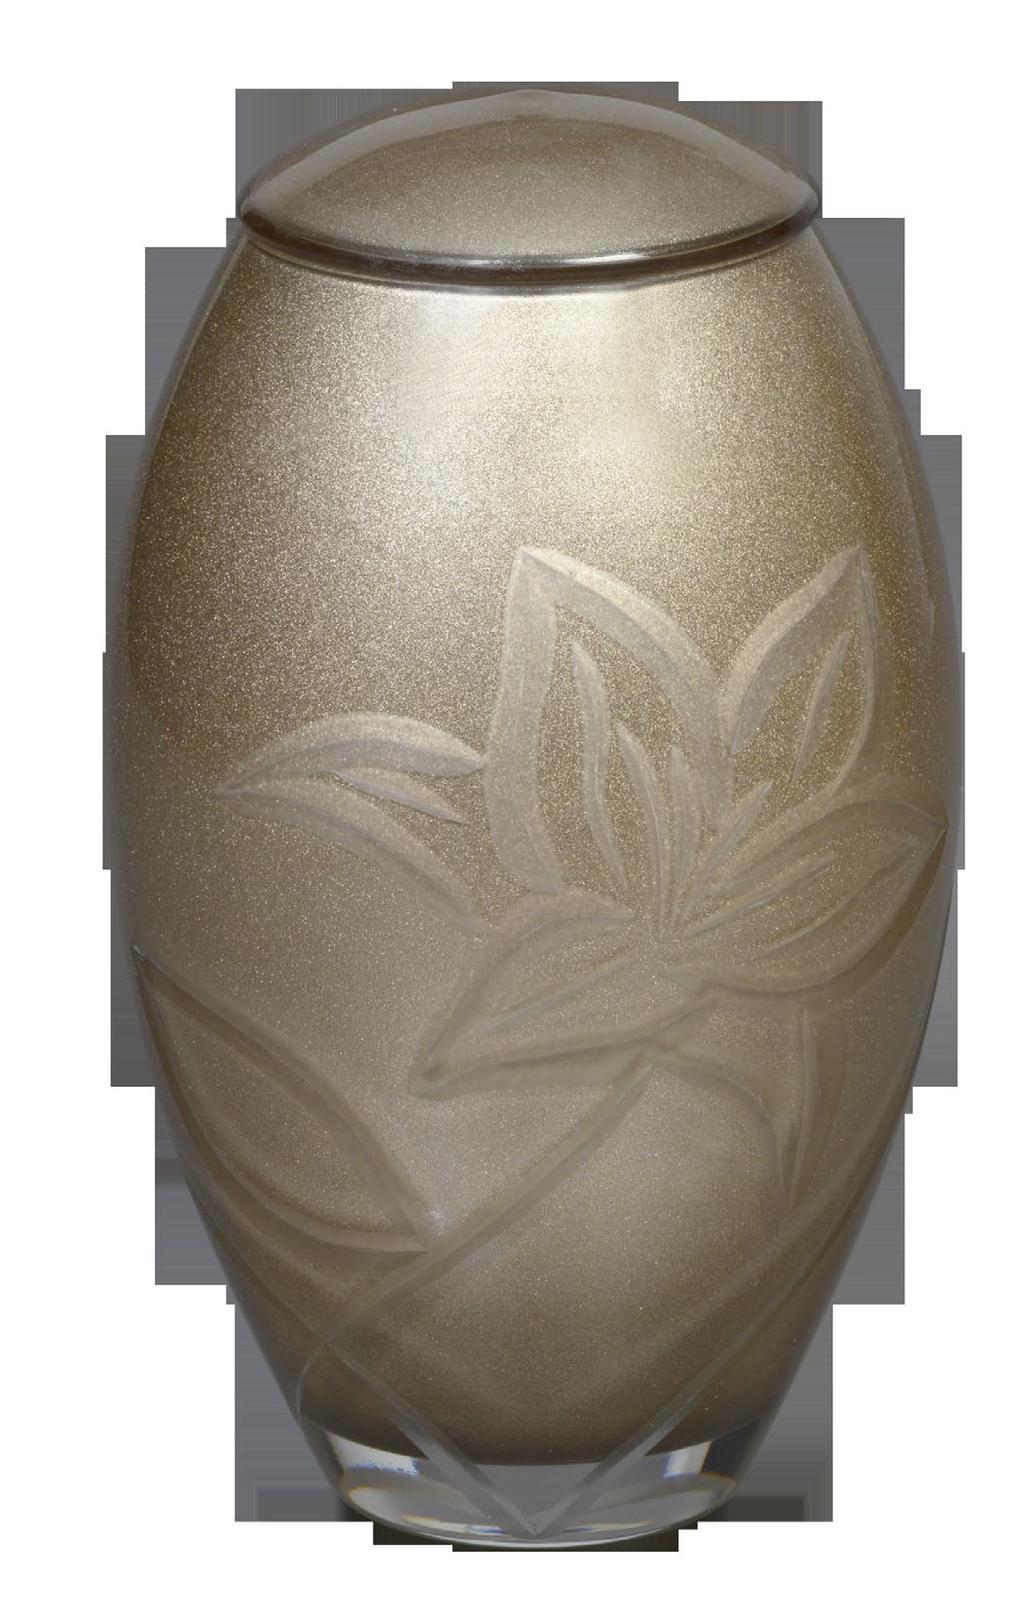 GLASS The Parisian Gold Lily is a hand-blown glass urn. Each urn is handcrafted giving a distinctive and unique look.